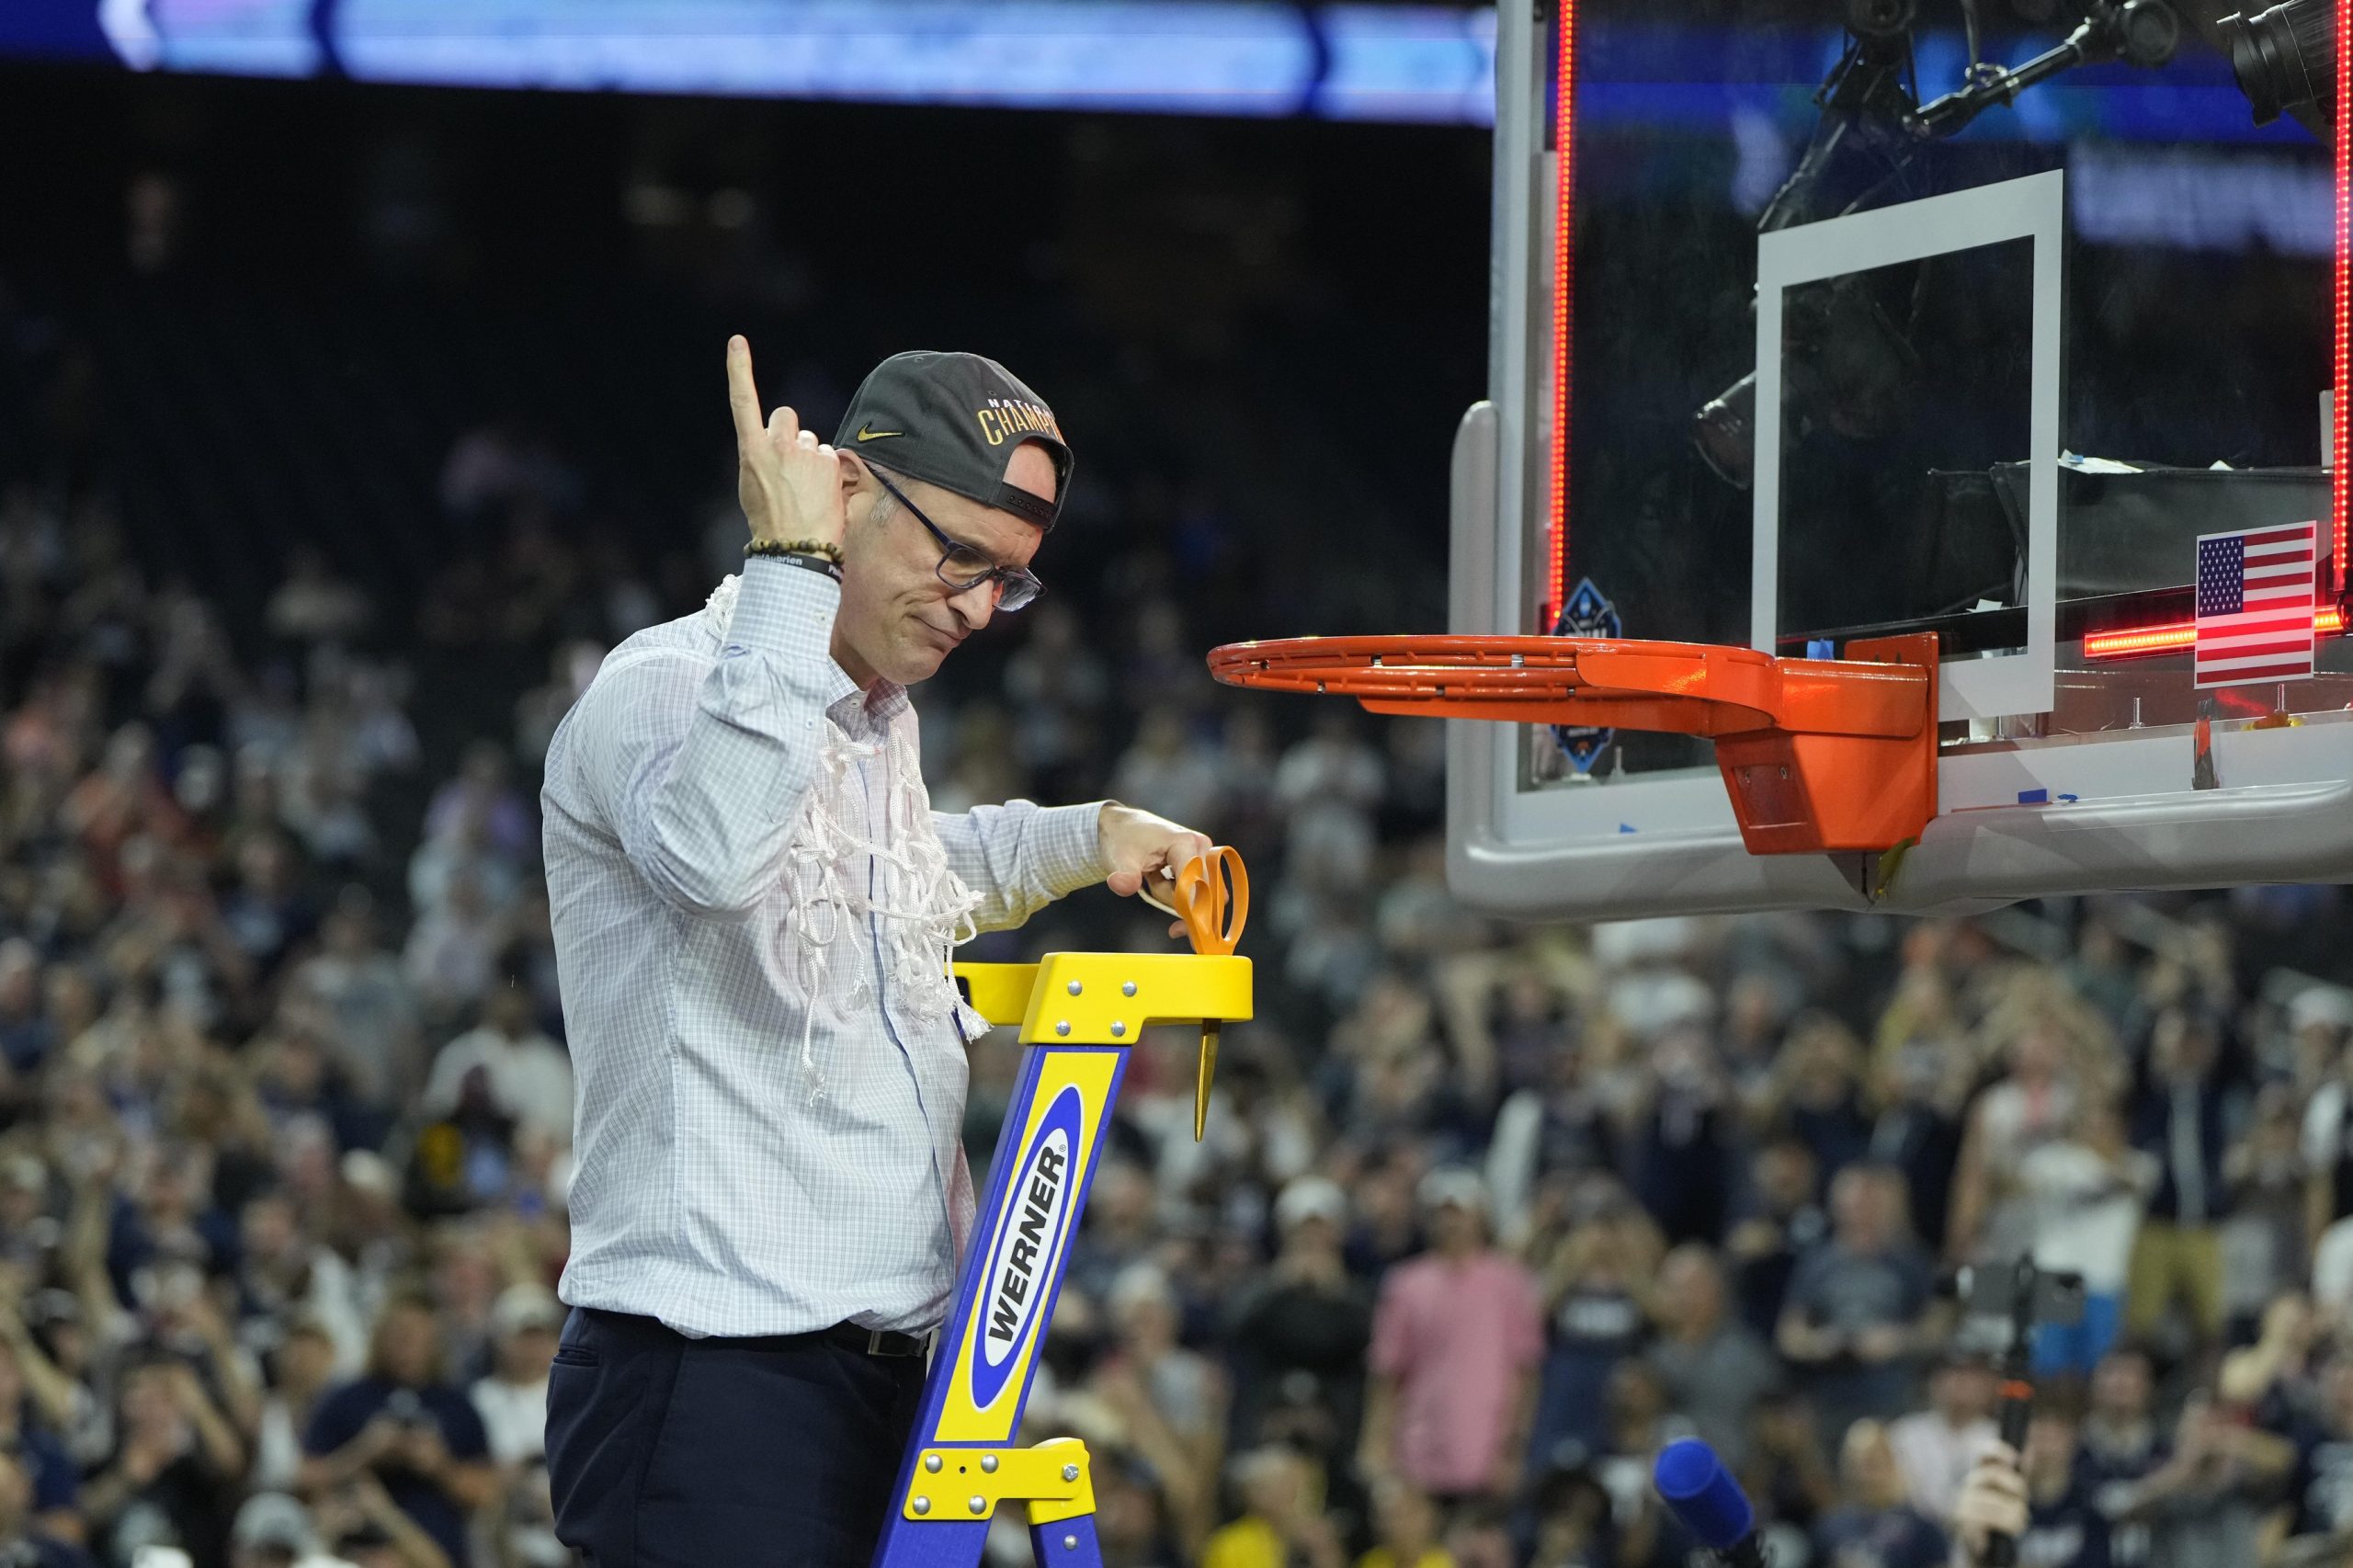 Apr 3, 2023; Houston, TX, USA; Connecticut Huskies head coach Dan Hurley celebrates after cutting down the net after defeating the San Diego State Aztecs in the national championship game of the 2023 NCAA Tournament at NRG Stadium. Mandatory Credit: Bob Donnan-USA TODAY Sports